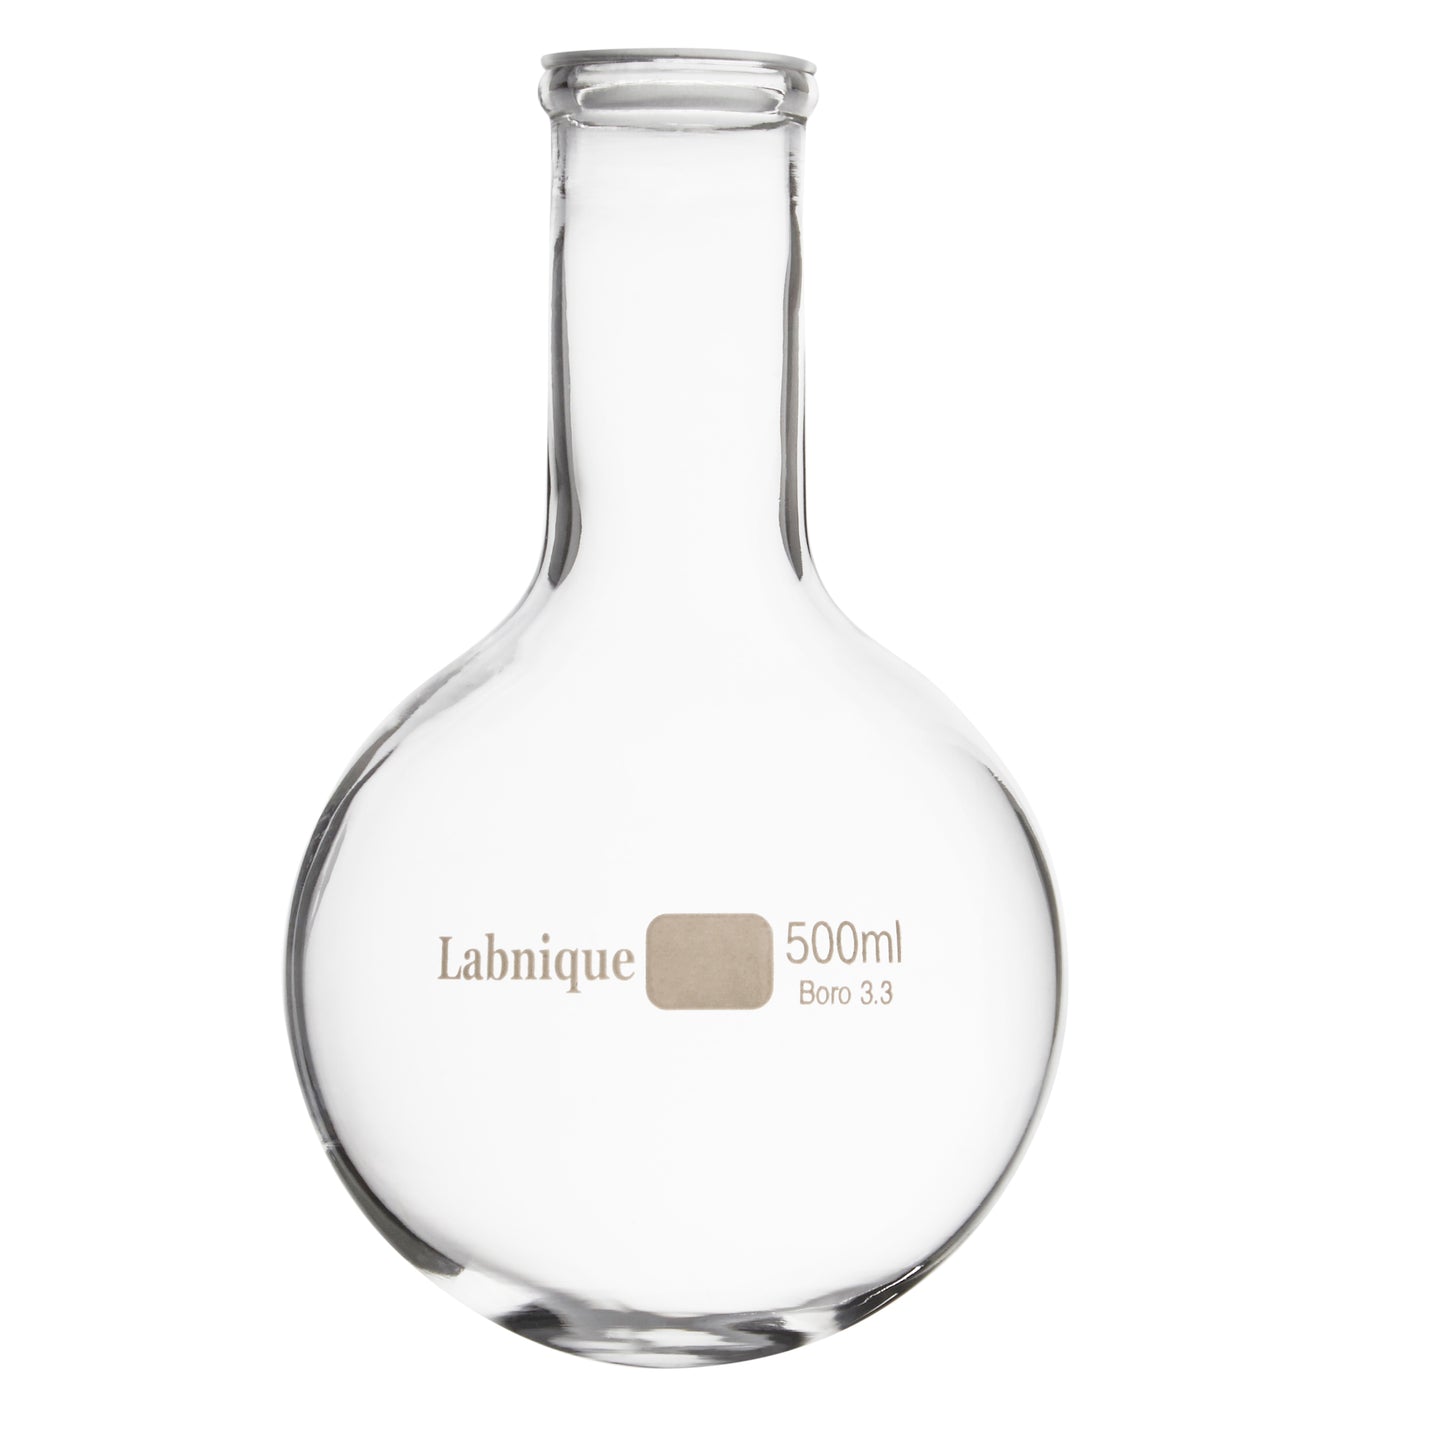 Glass Boiling Flask (Florence Flask) with Round Bottom, Long Neck, 500ml (Pack of 8)